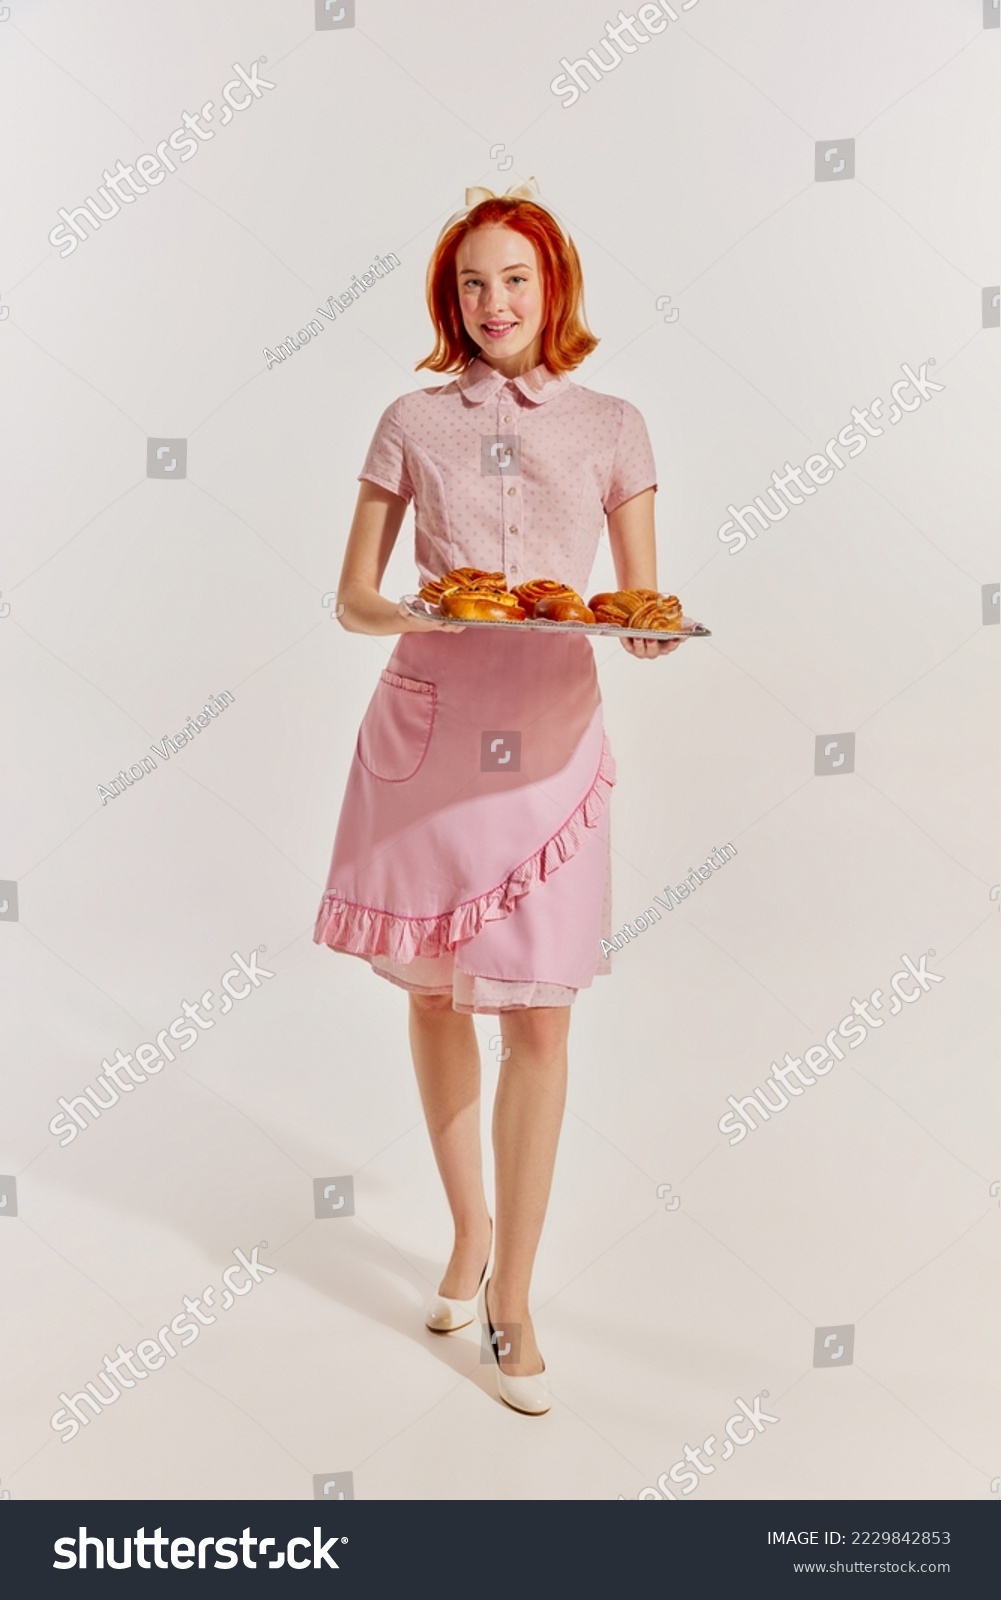 Portrait of young redhead woman in cute pink dress with freshly baked buns isolated over grey background. Concept of beauty, retro style, fashion, elegance, 60s, 70s, family. Copy space for ad #2229842853